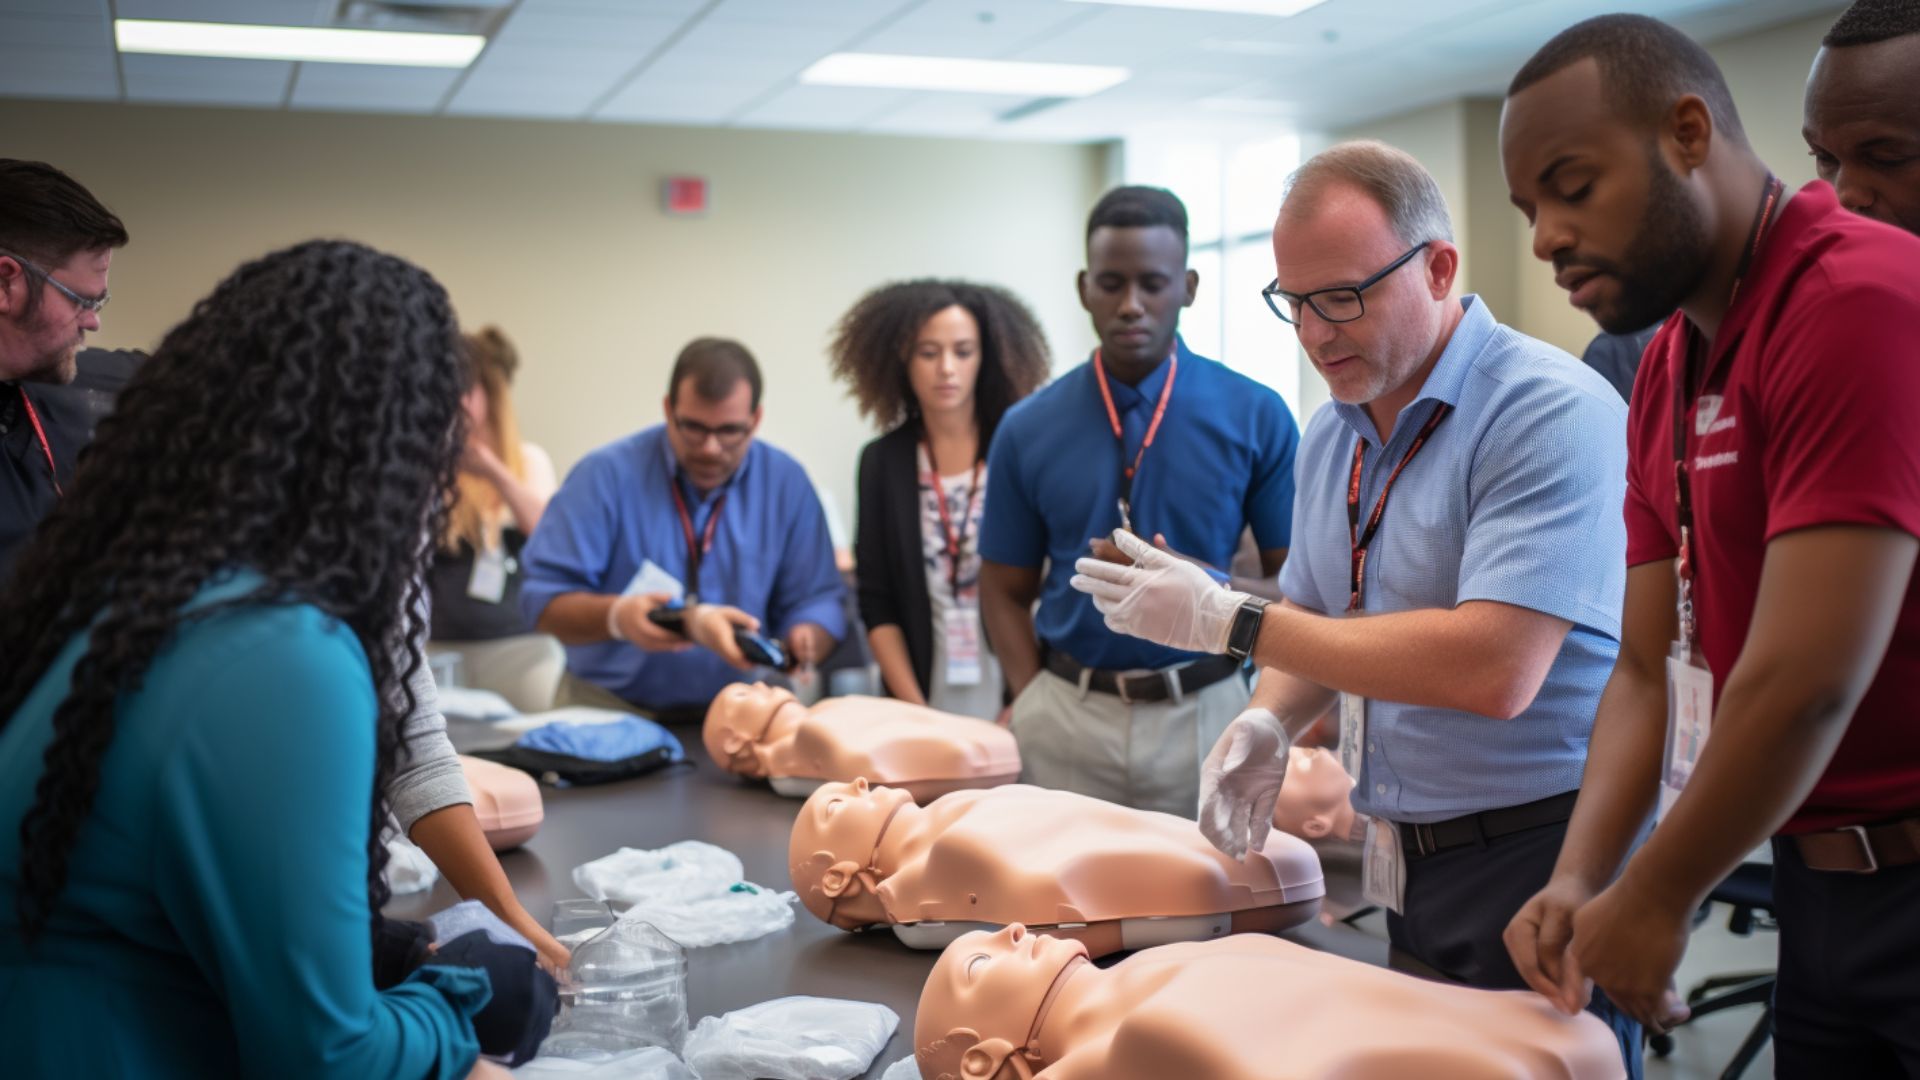 CPR Training for Businesses: Creating Safer Workplaces in Jacksonville, FL